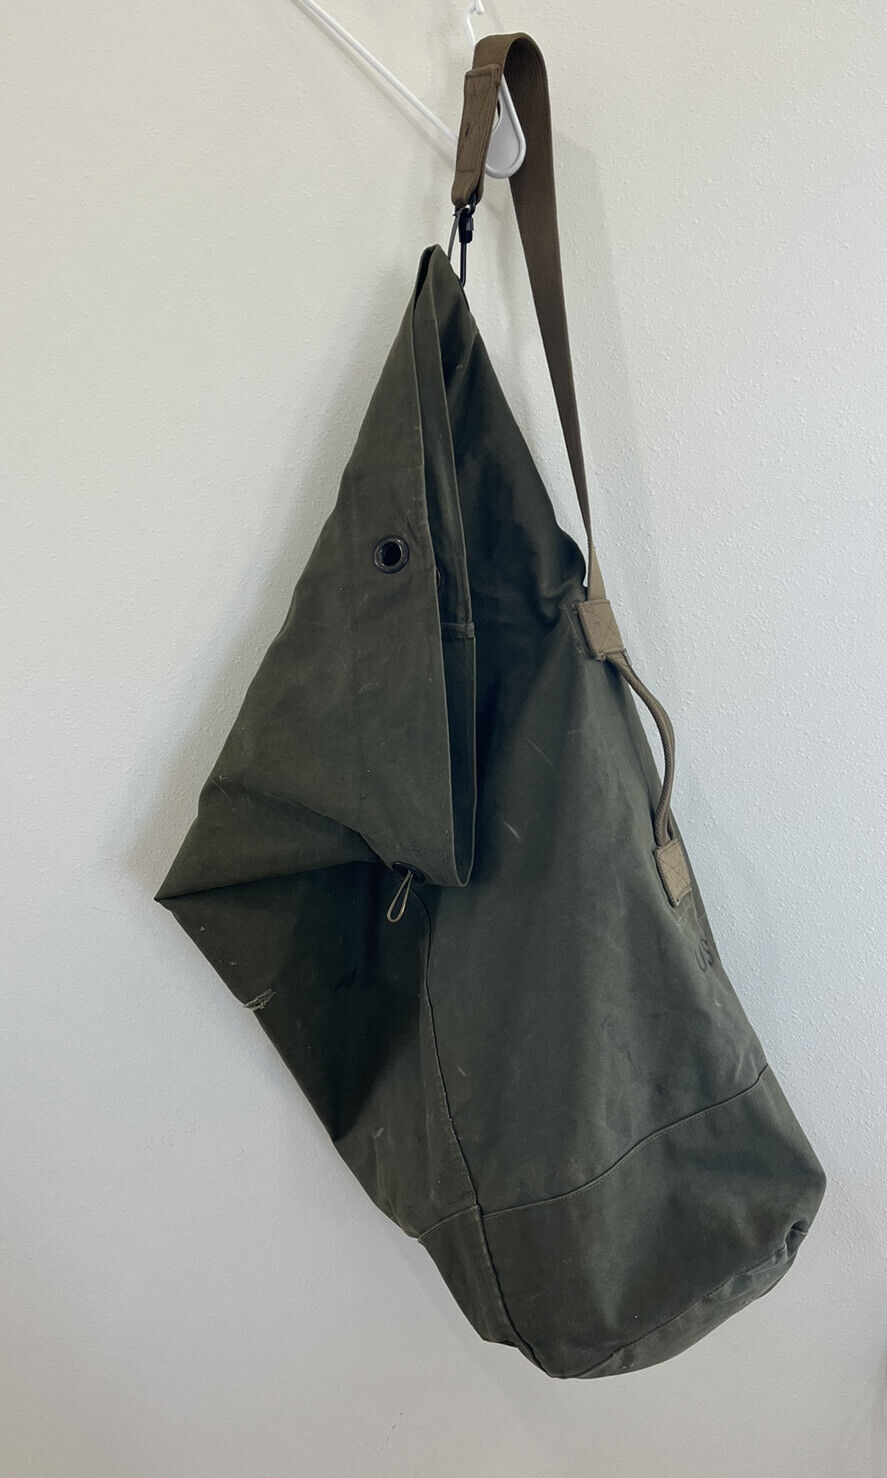 Vintage Military Large Duffle Bag US Canvas Army Green Carryall Sack